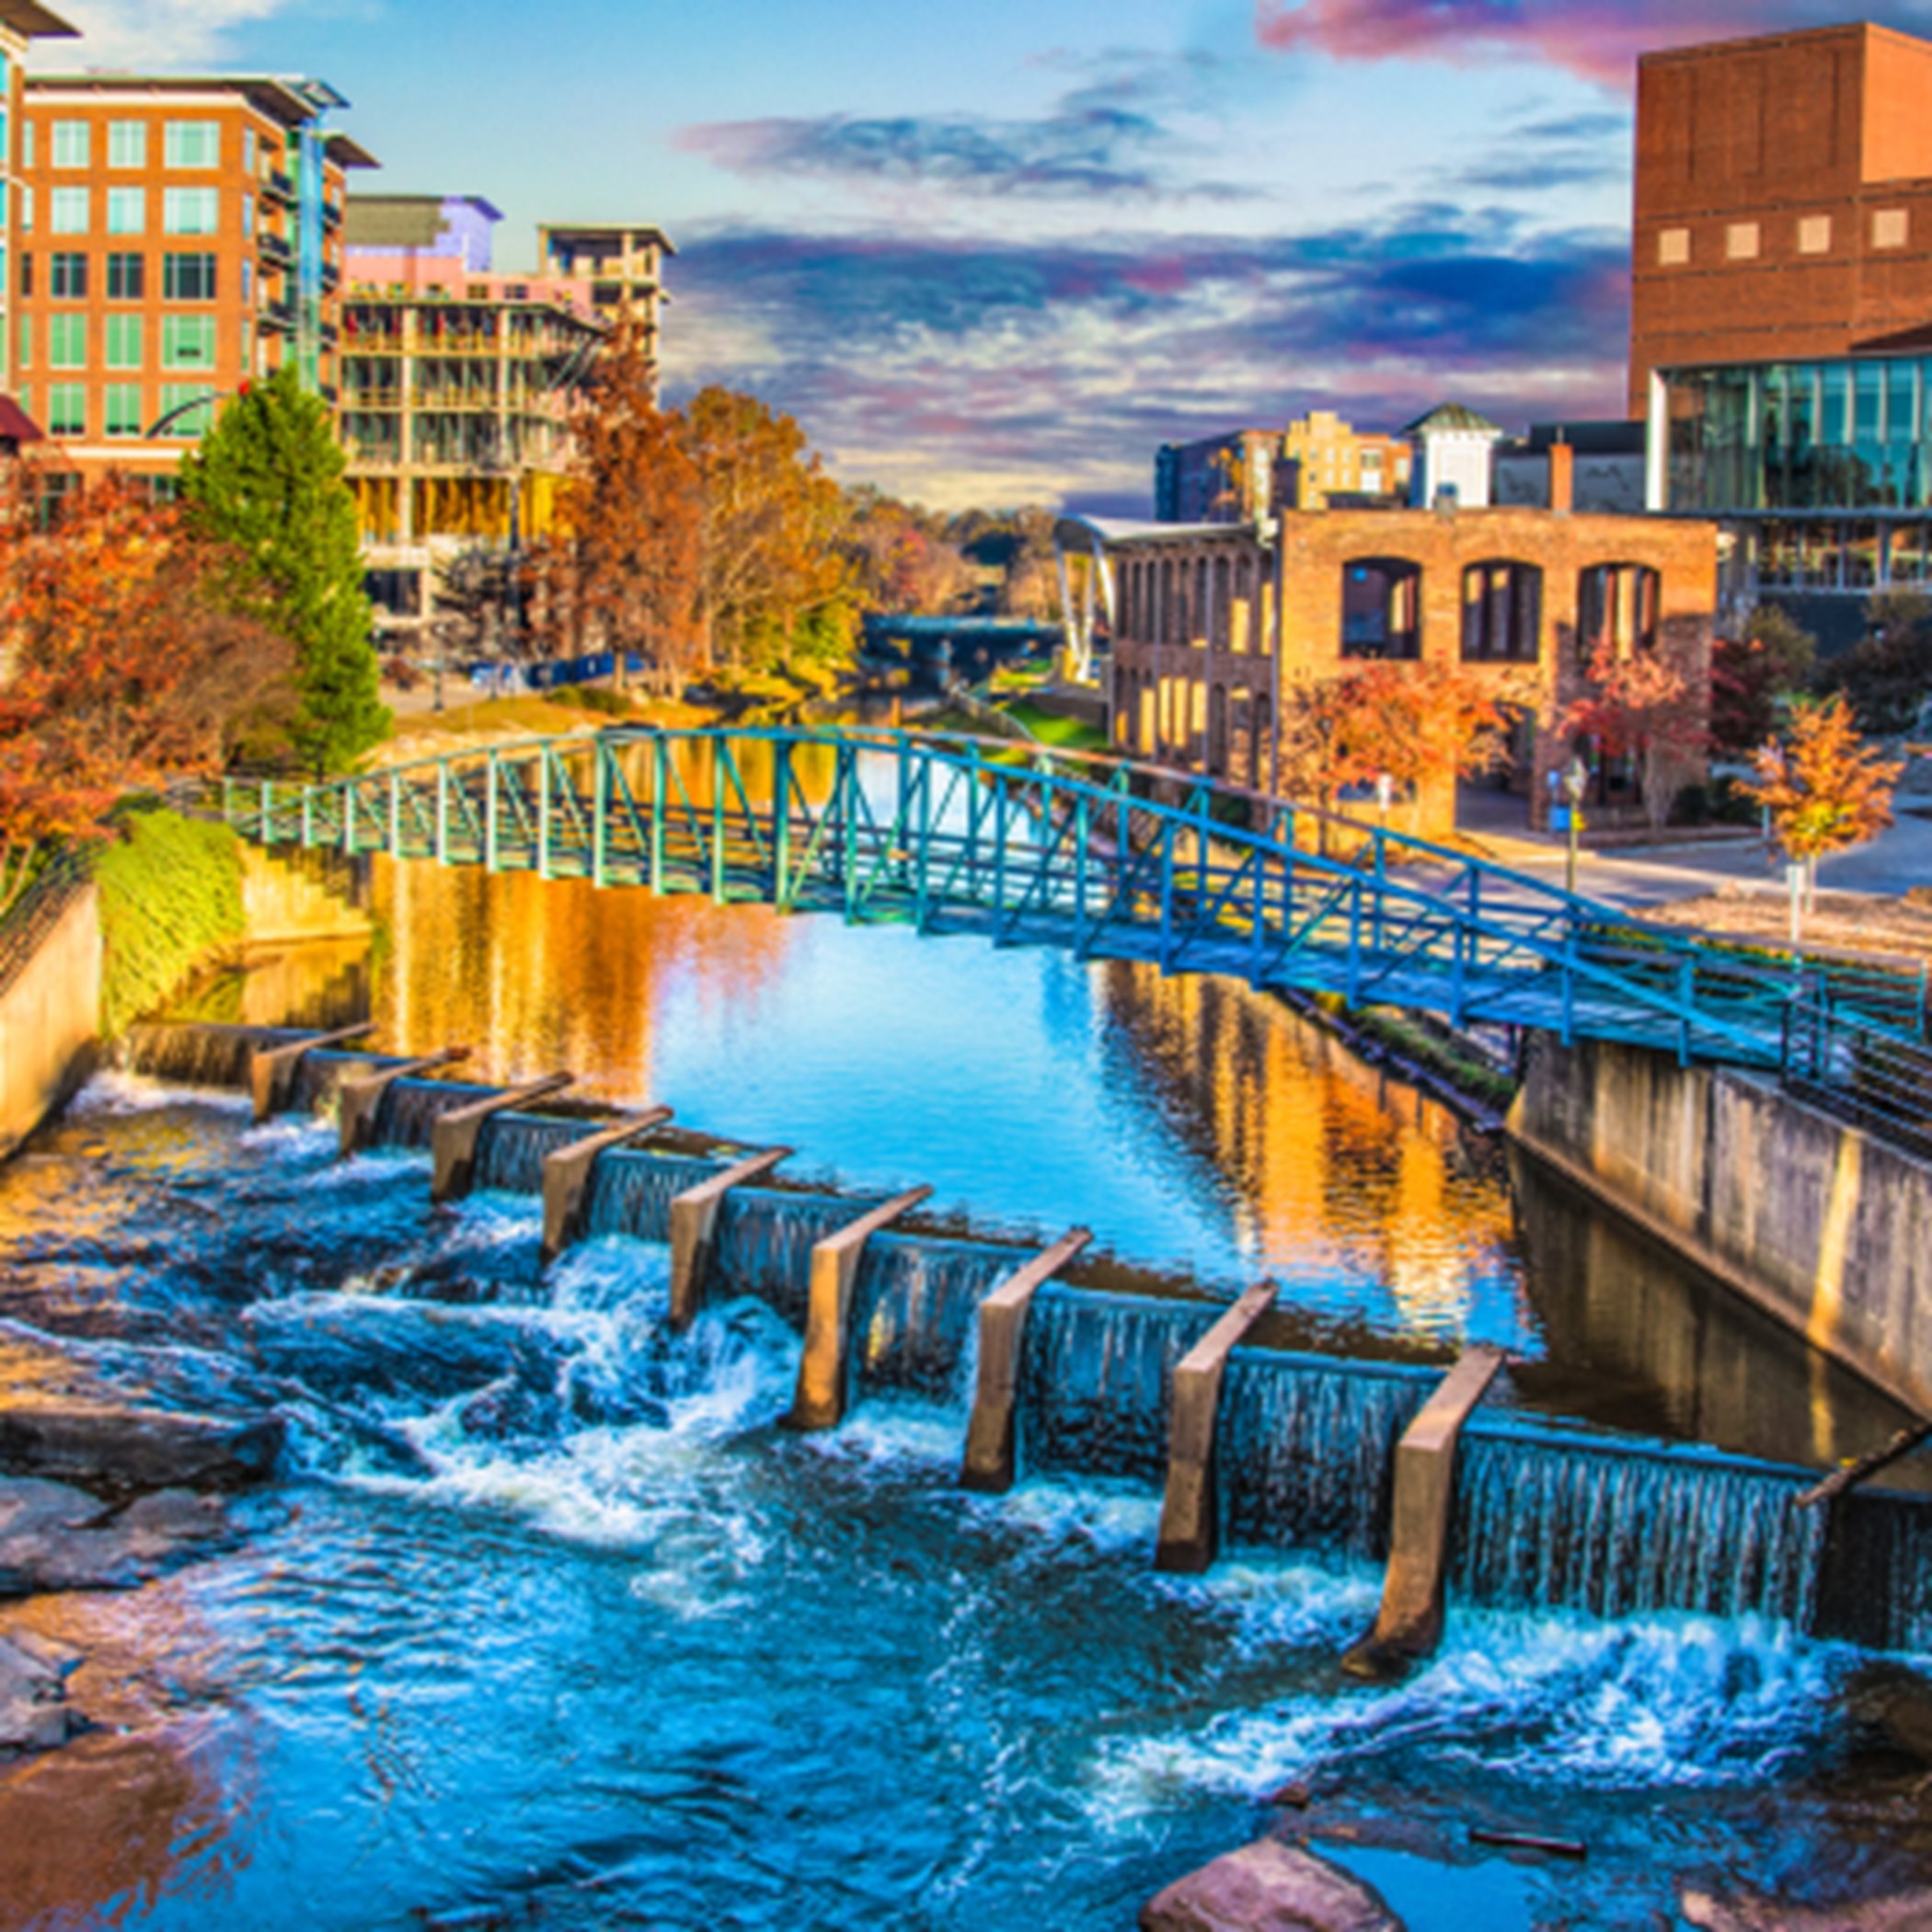 Greenville Downtown River